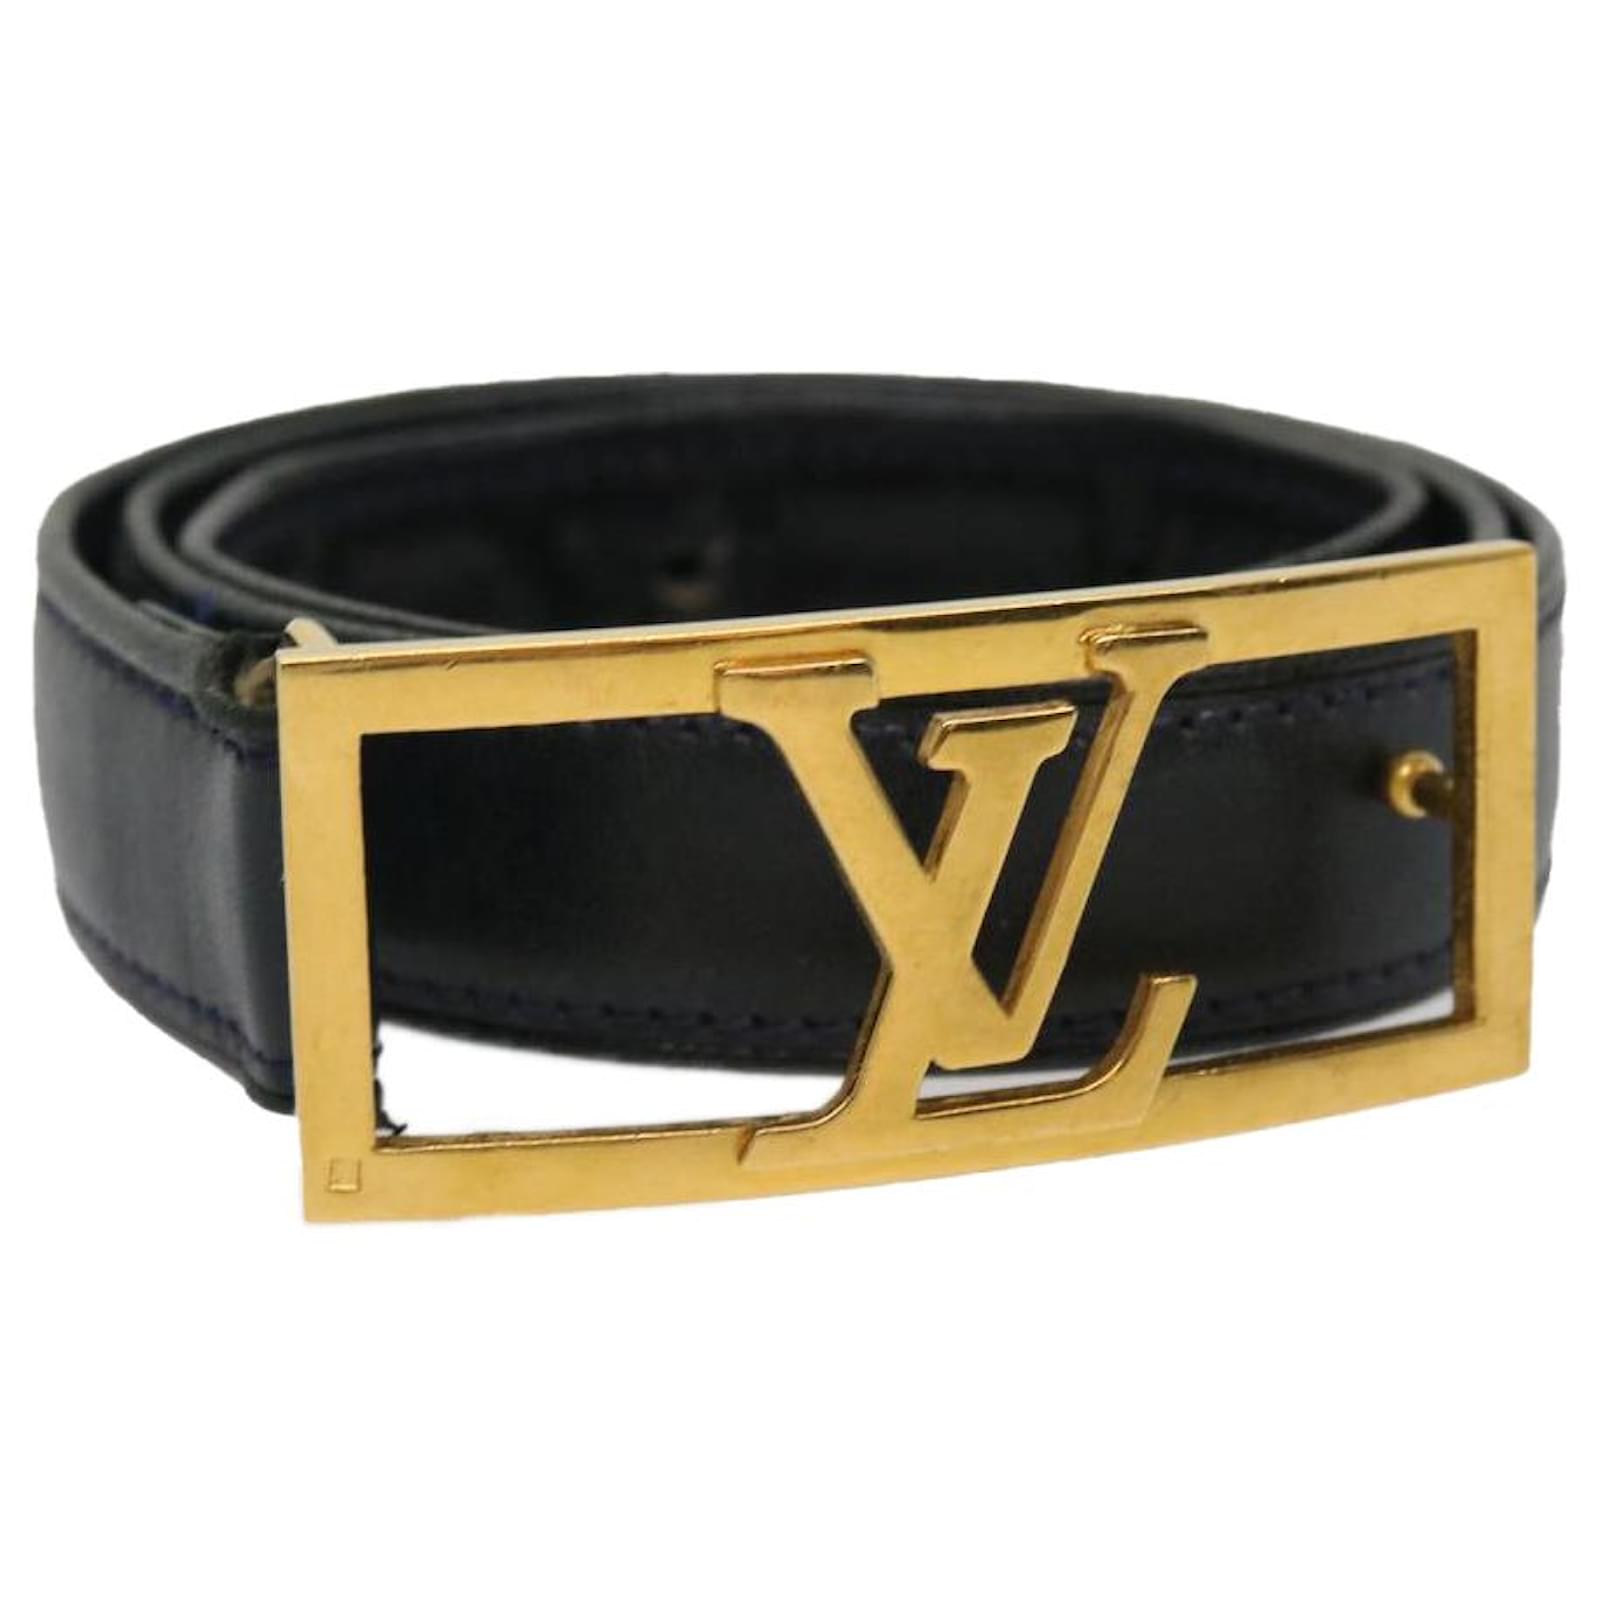 LOUIS VUITTON Black grained leather belt with gold jew…